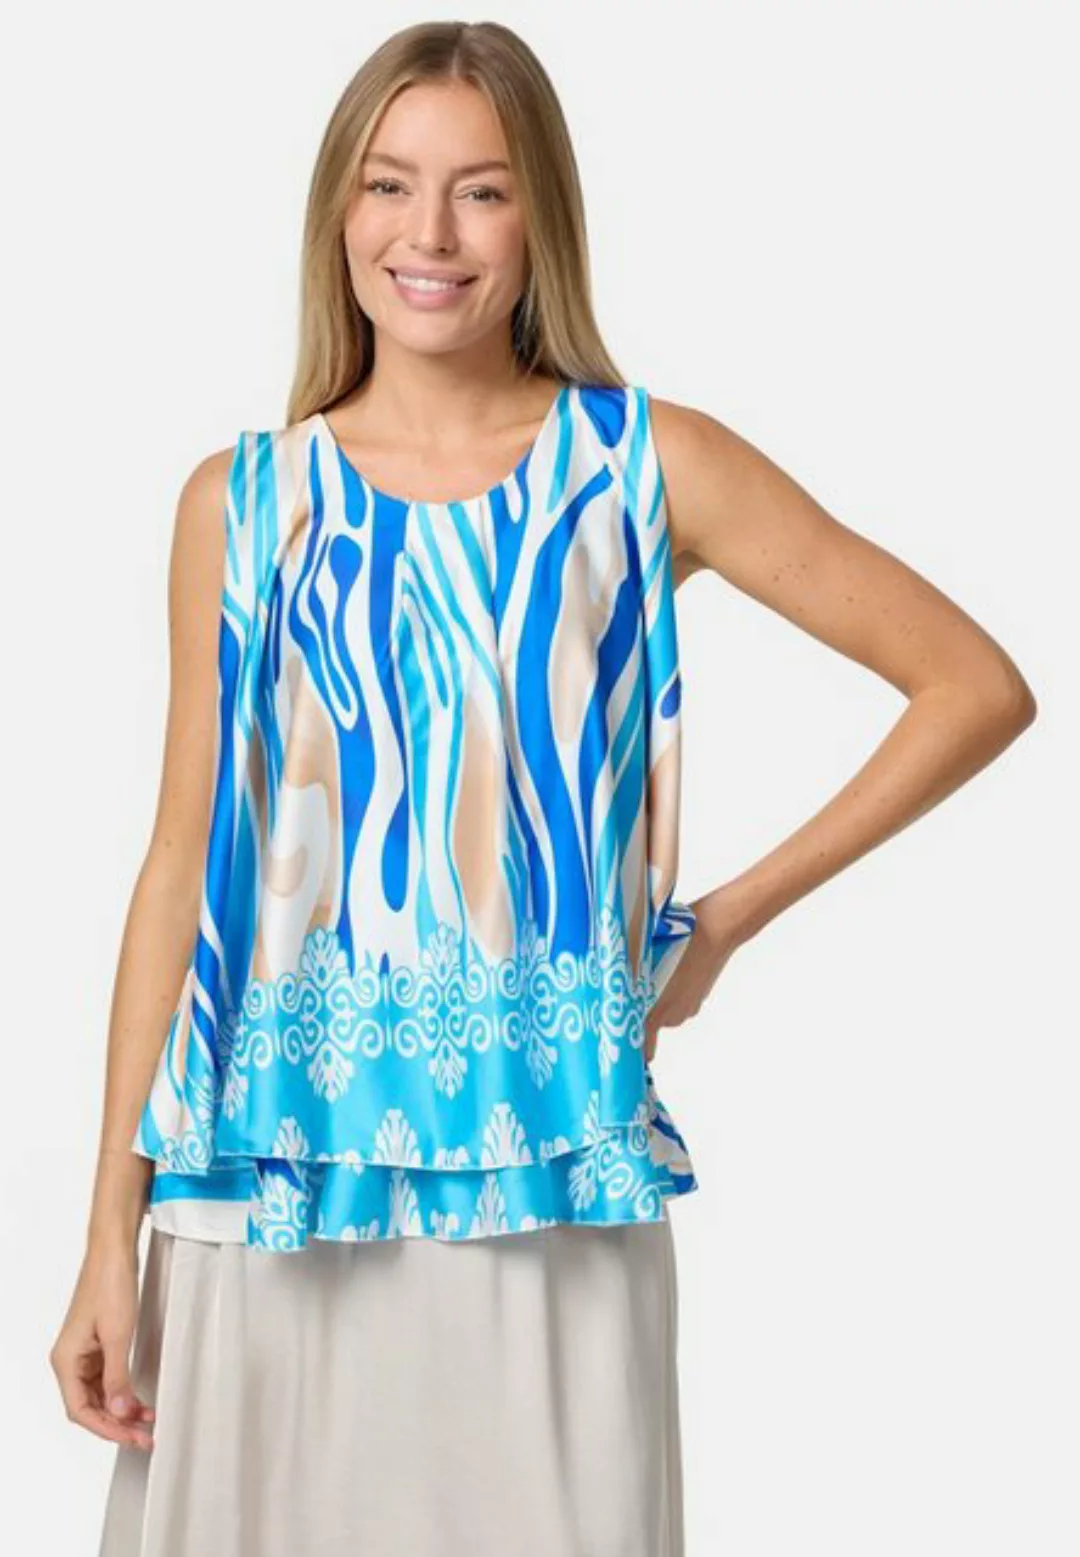 PM SELECTED Blusentop PM33 (Sommer Sleeveless Overlay Satin Muster Top in E günstig online kaufen